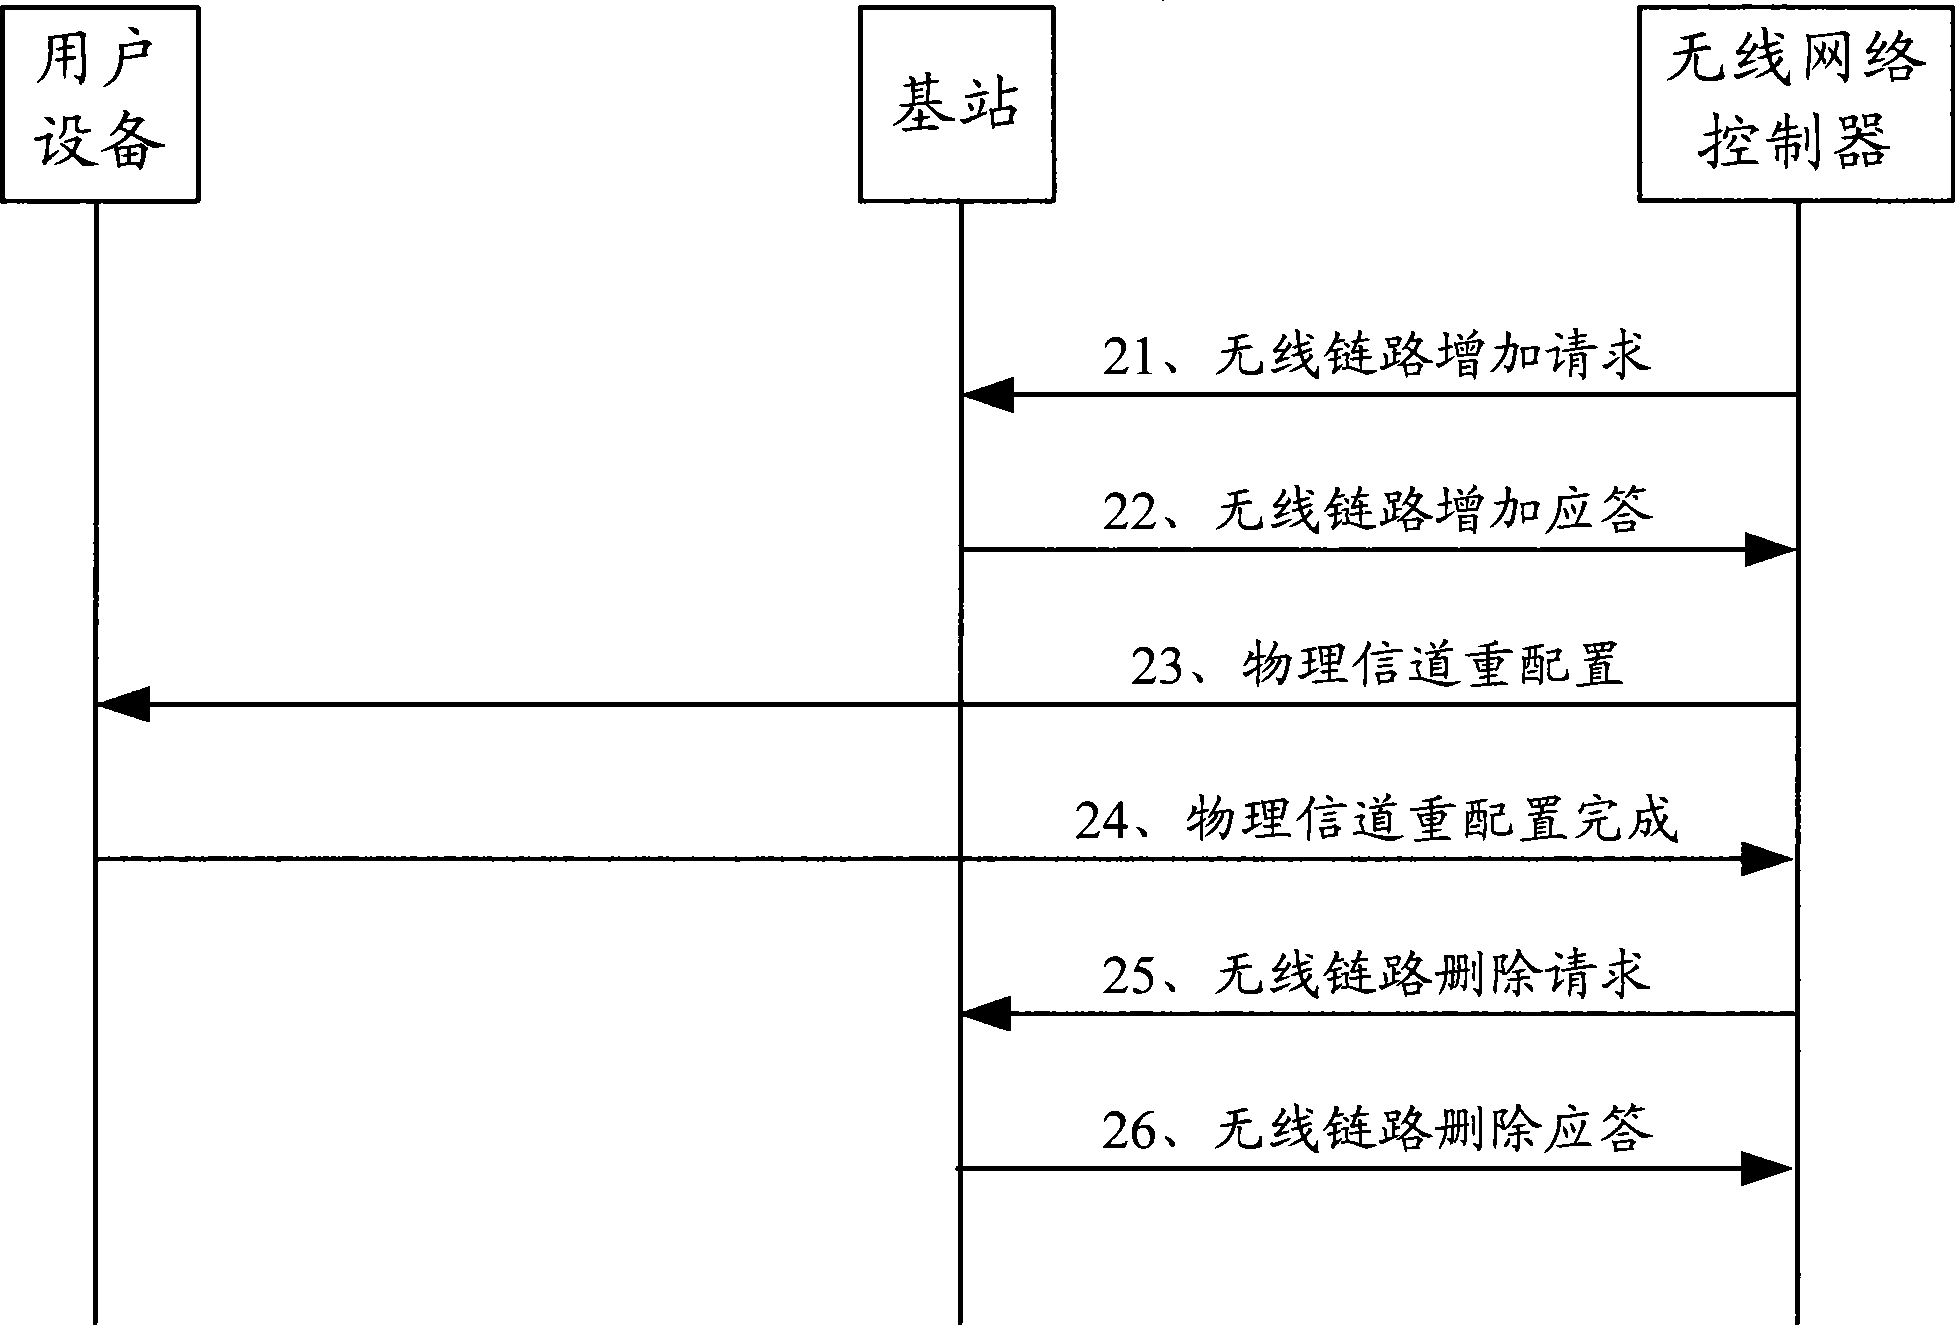 Method and apparatus for switching district in a base station, method and apparatus for switching channel in a district